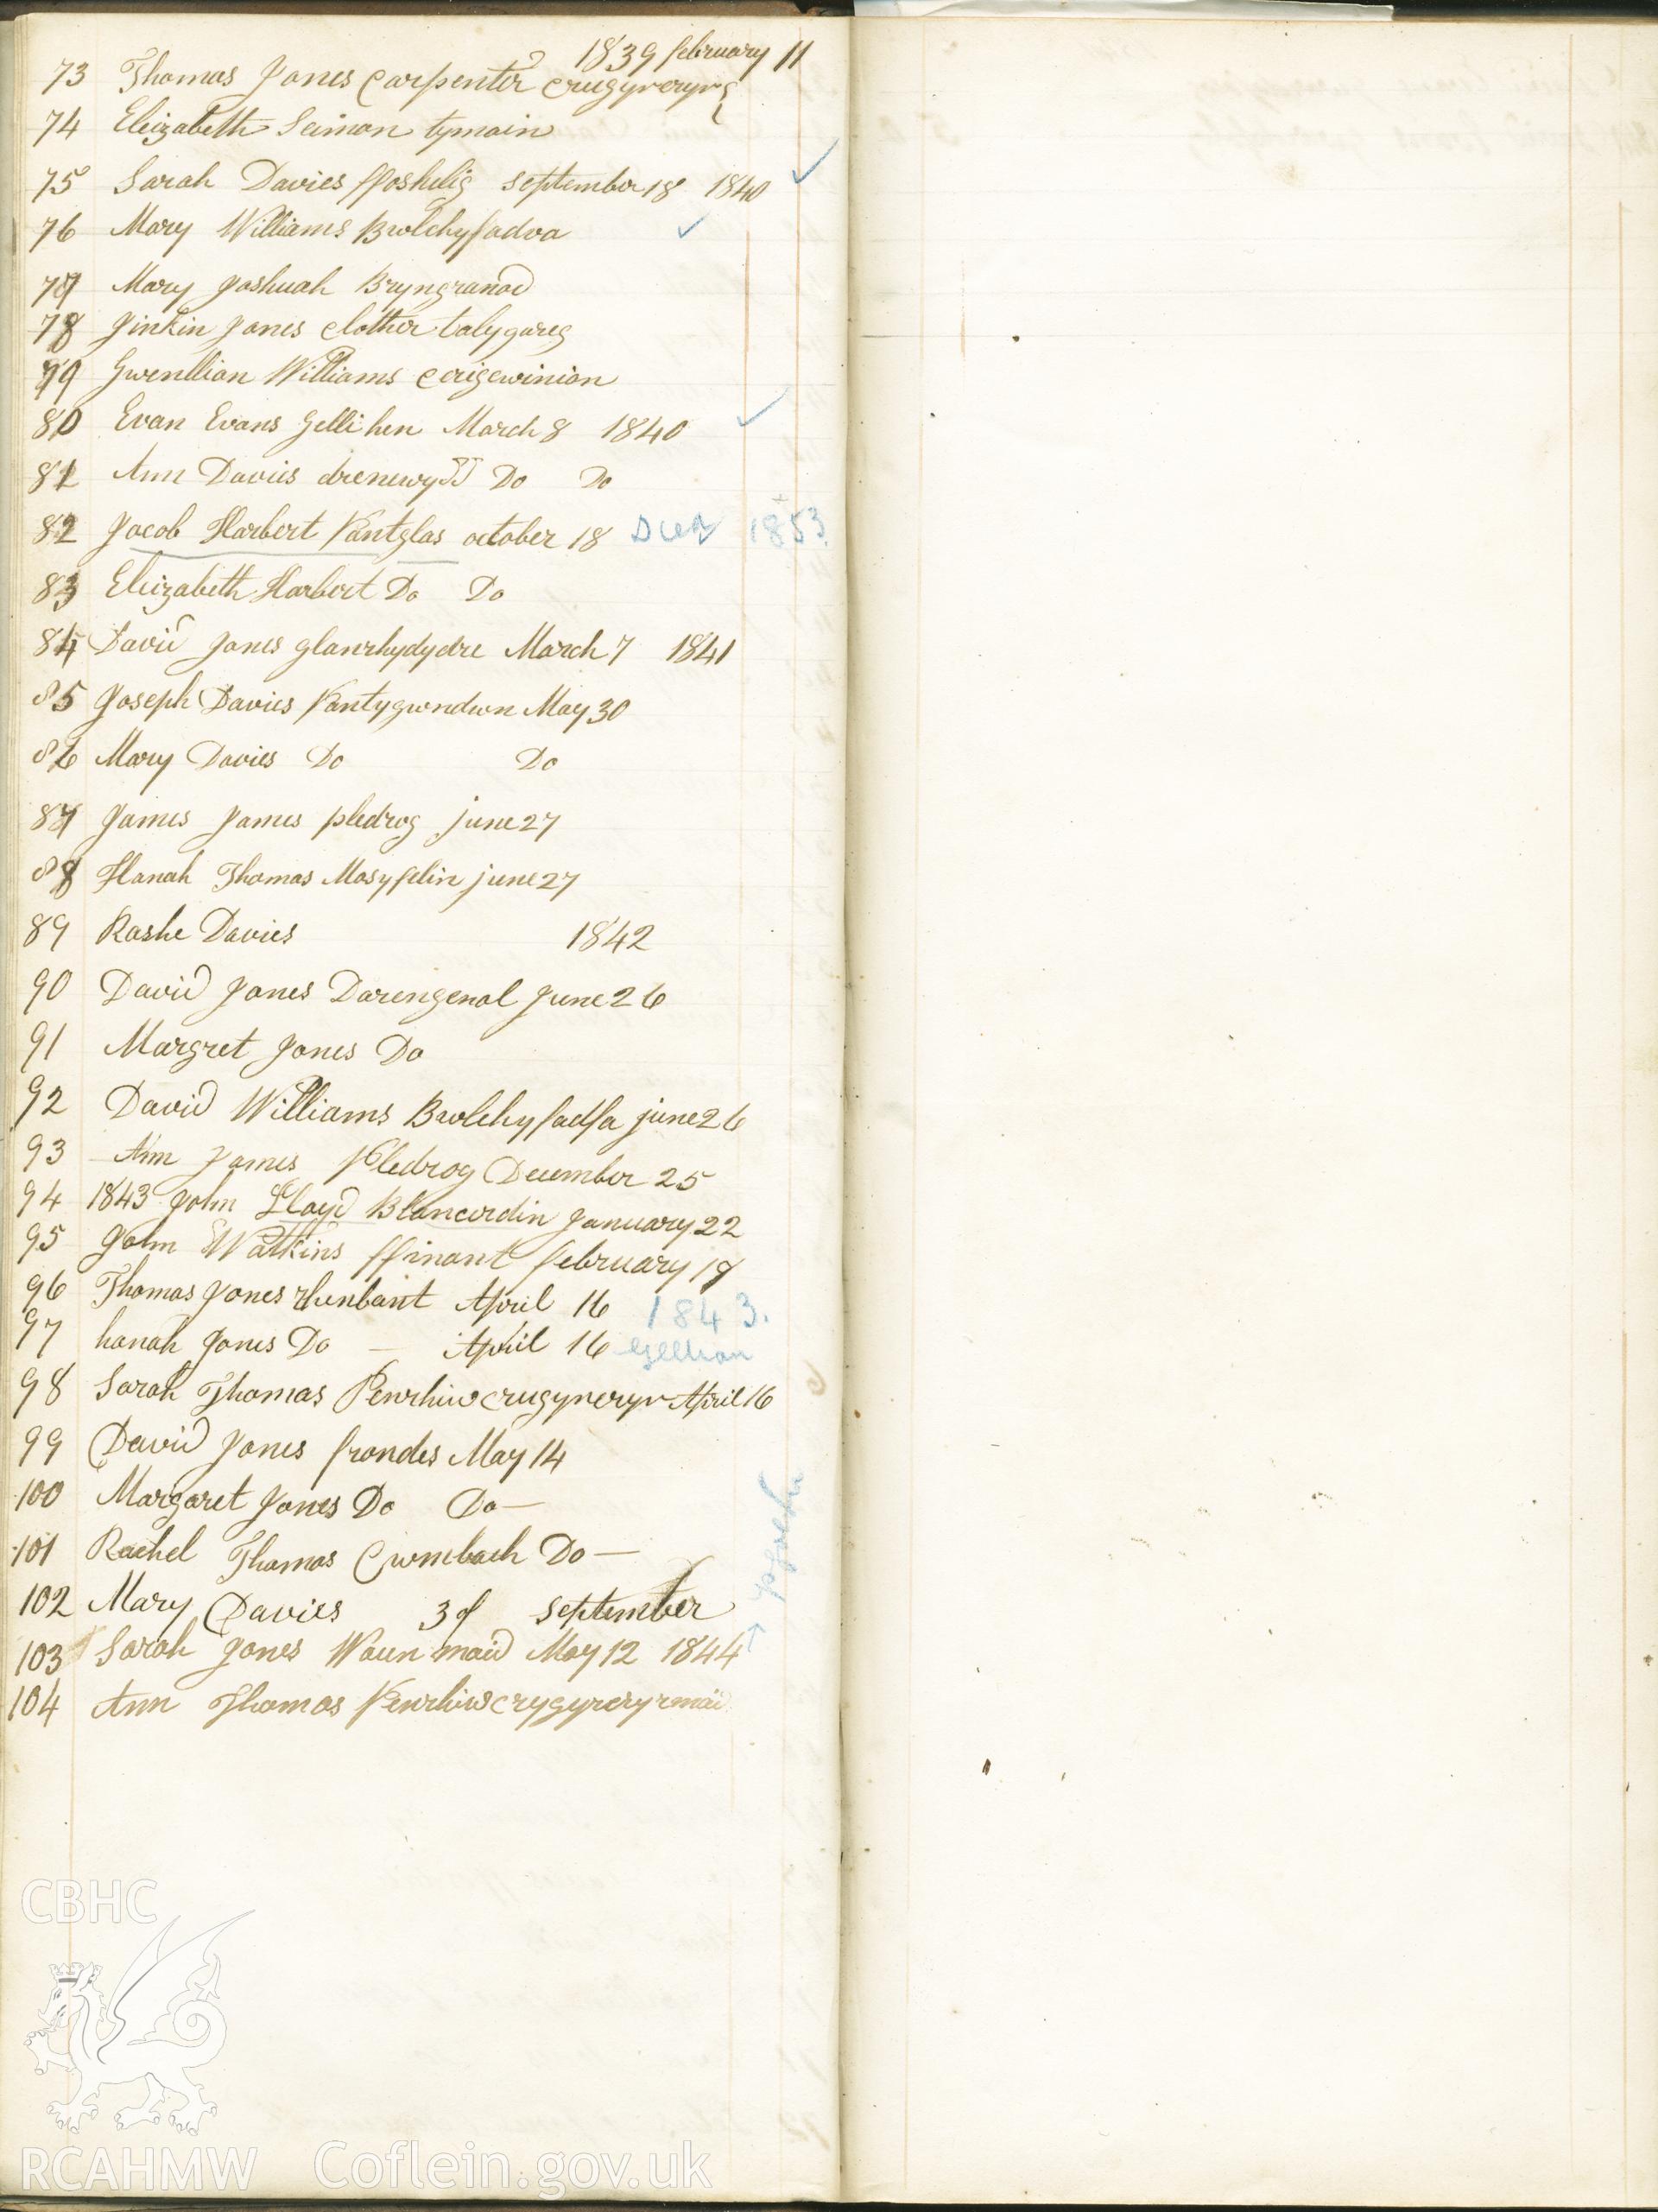 Page from handwritten Subscriber's book for yr Hen Gapel, Rhydowen. Names on this page begin with 1839 February 73. Thomas Jones Canpenter Crugyreryr and end with 104. Ann Thomas Penrhiw Crygyreryr. Donated to the RCAHMW as part of the Digital Dissent Project.